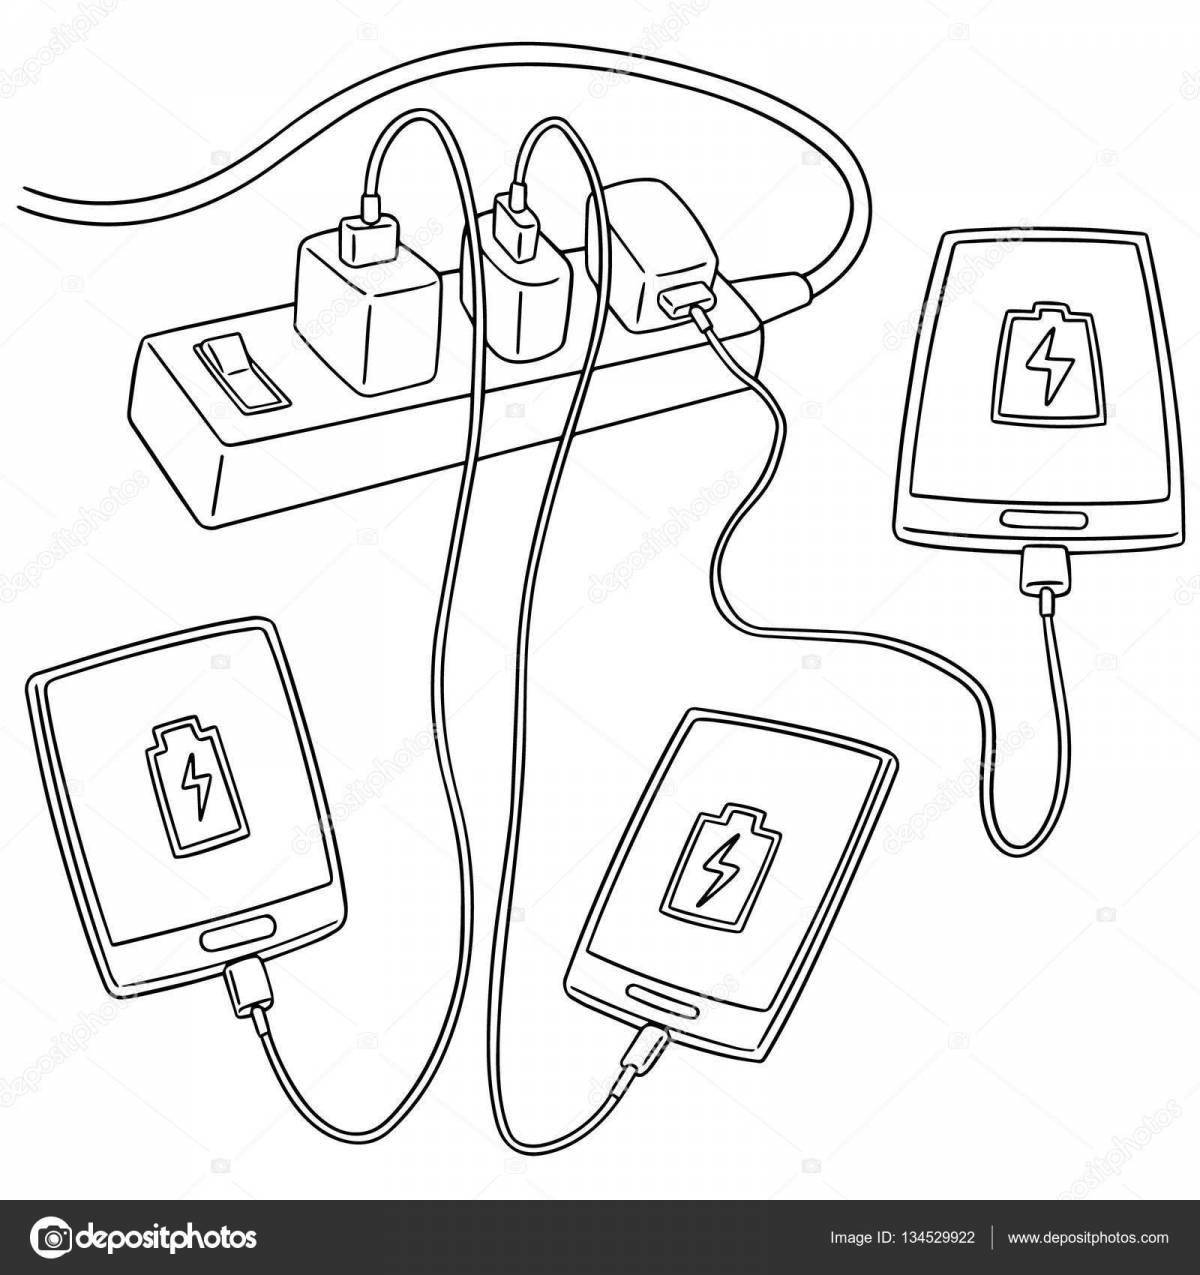 Coloring page of mobile phone charger